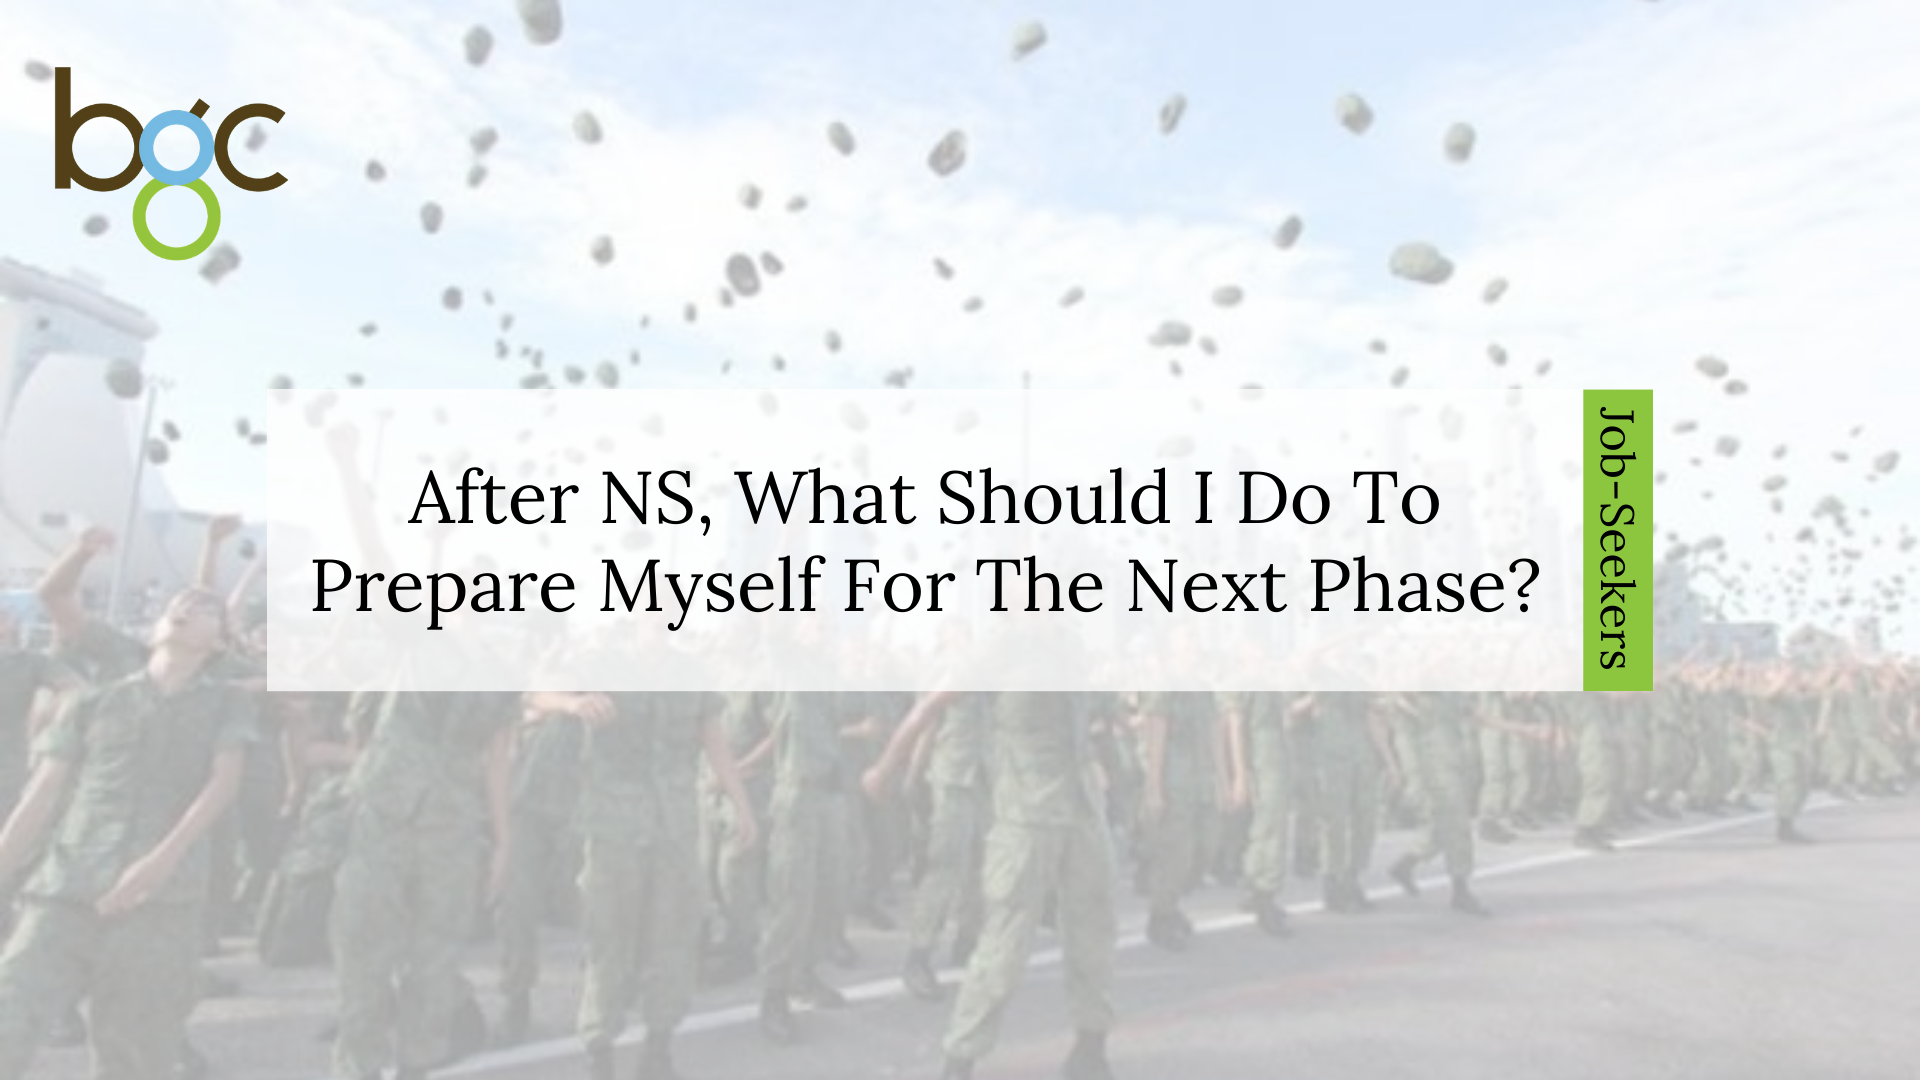 After Ns, What Should I Do To Prepare Myself For The Next Phase